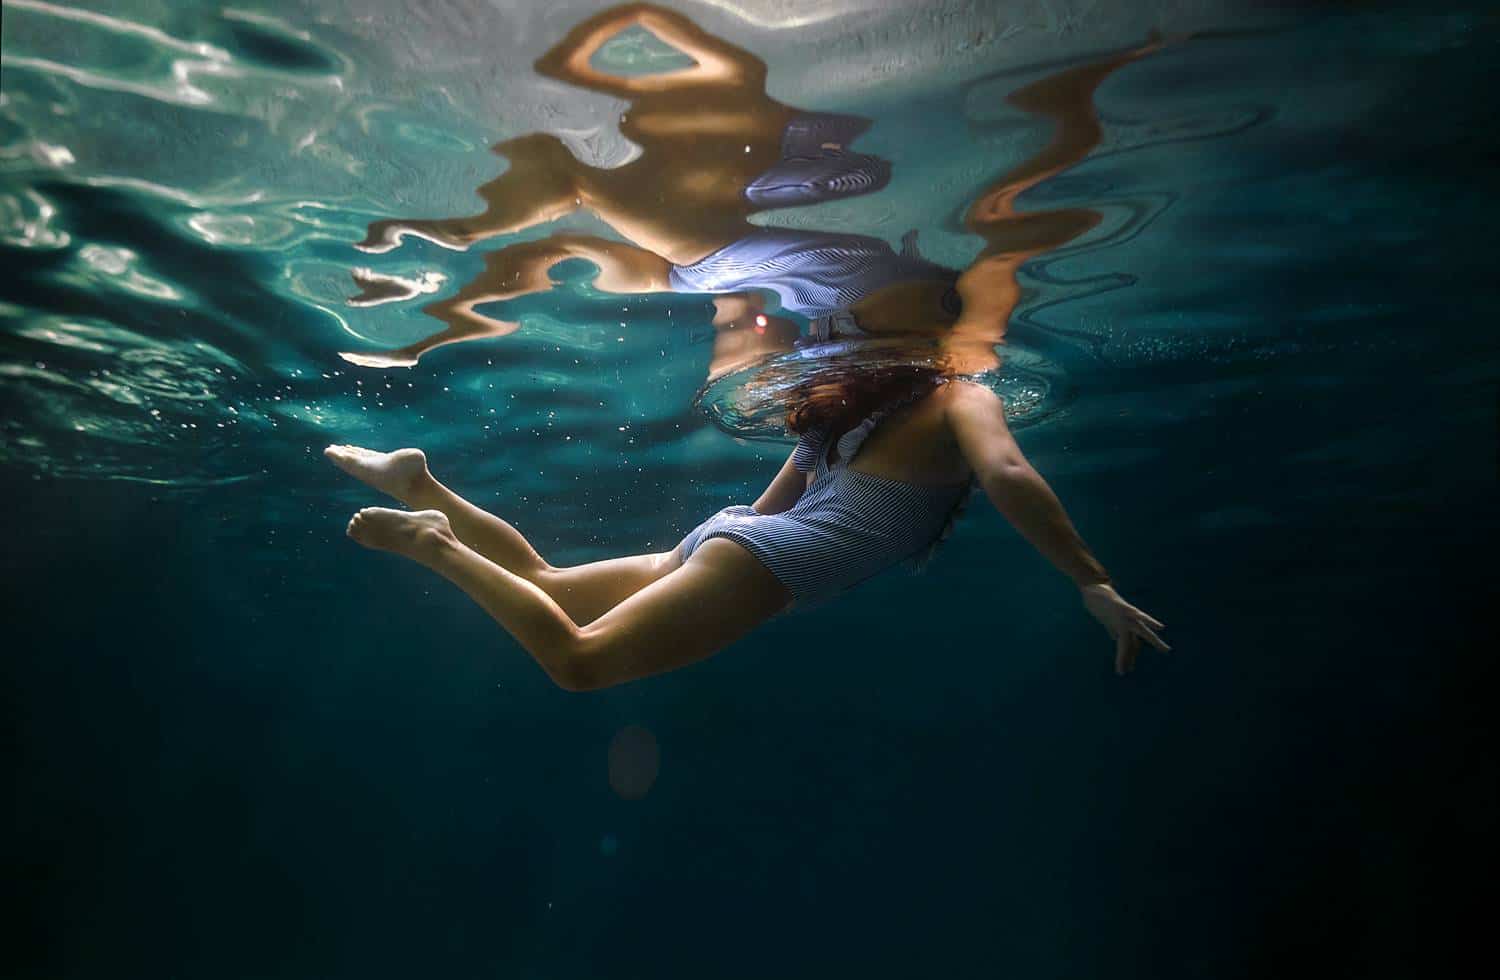 A child in a blue bathing suit swims with their head barely breaking the surface of the pool